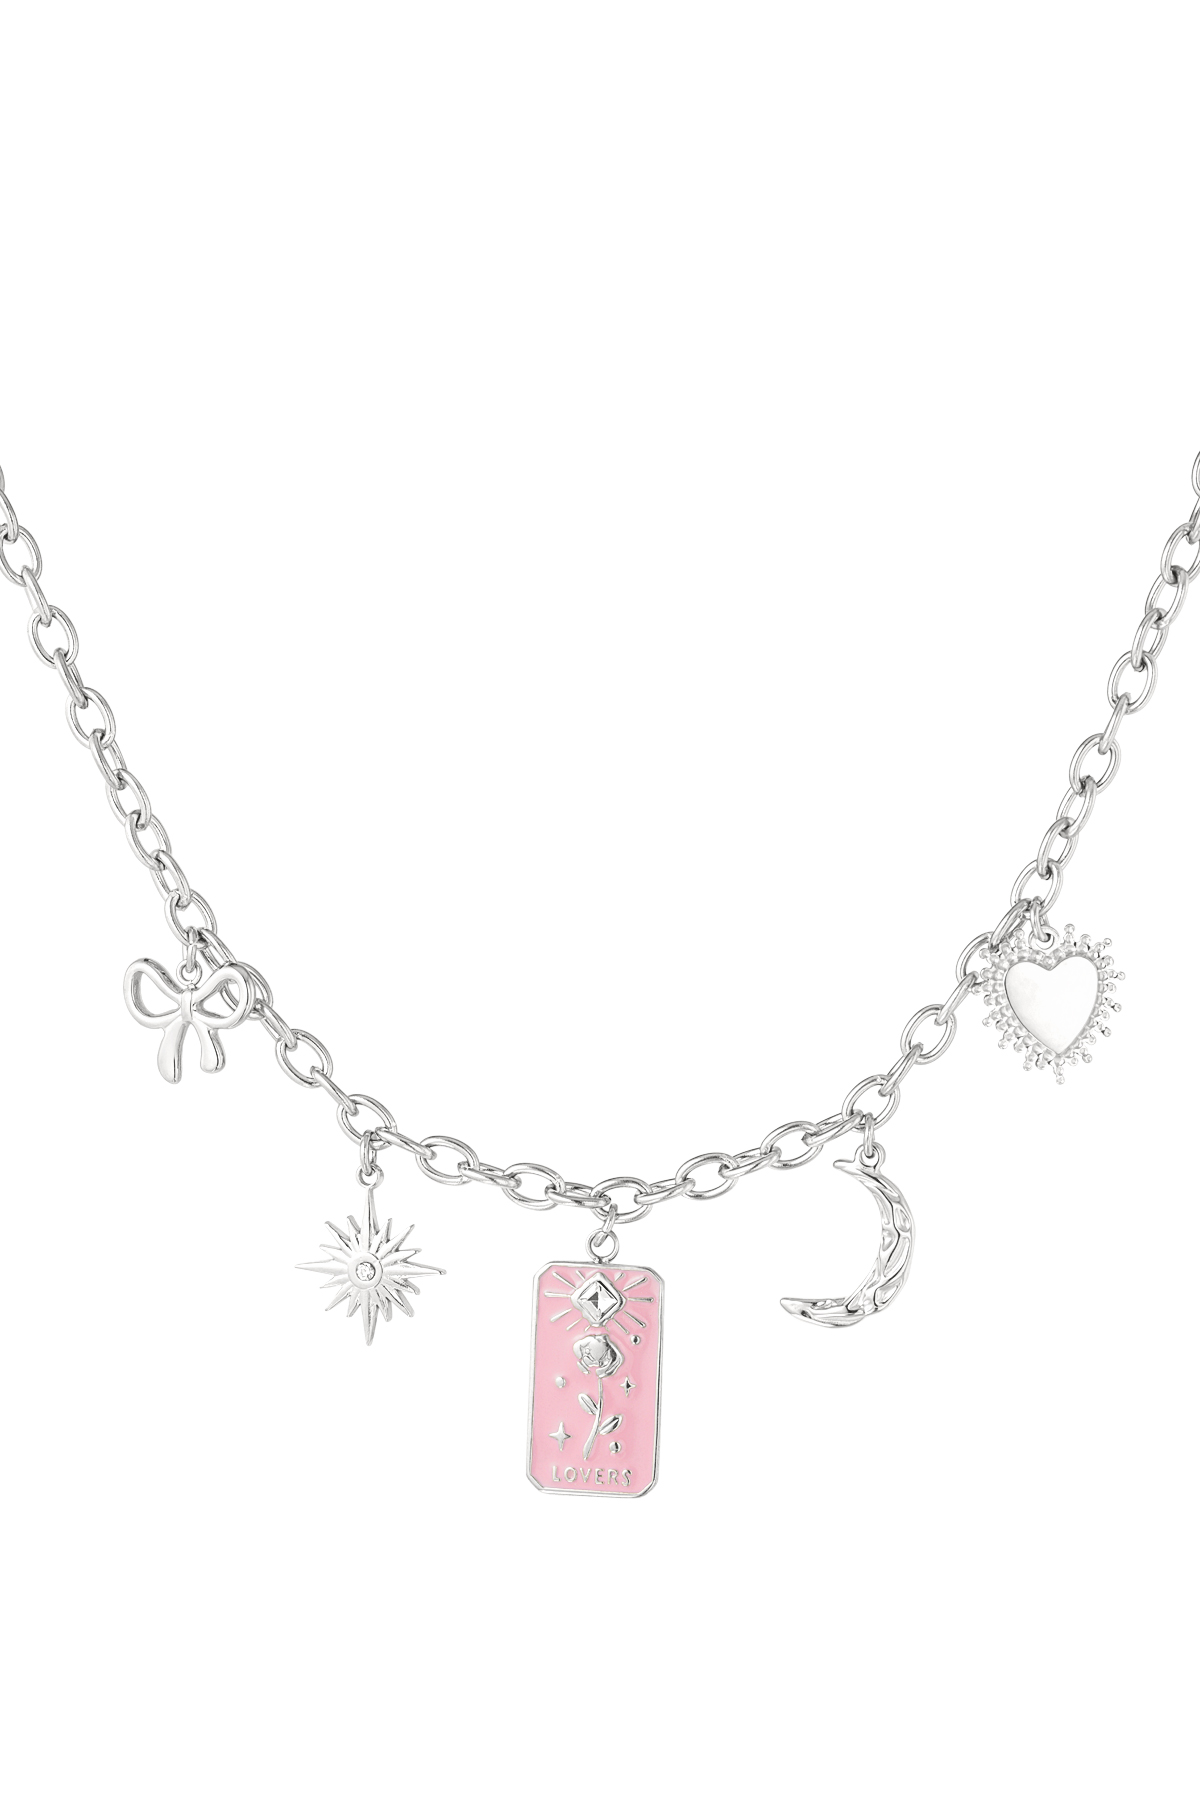 Rose lovers charm necklace - silver h5 